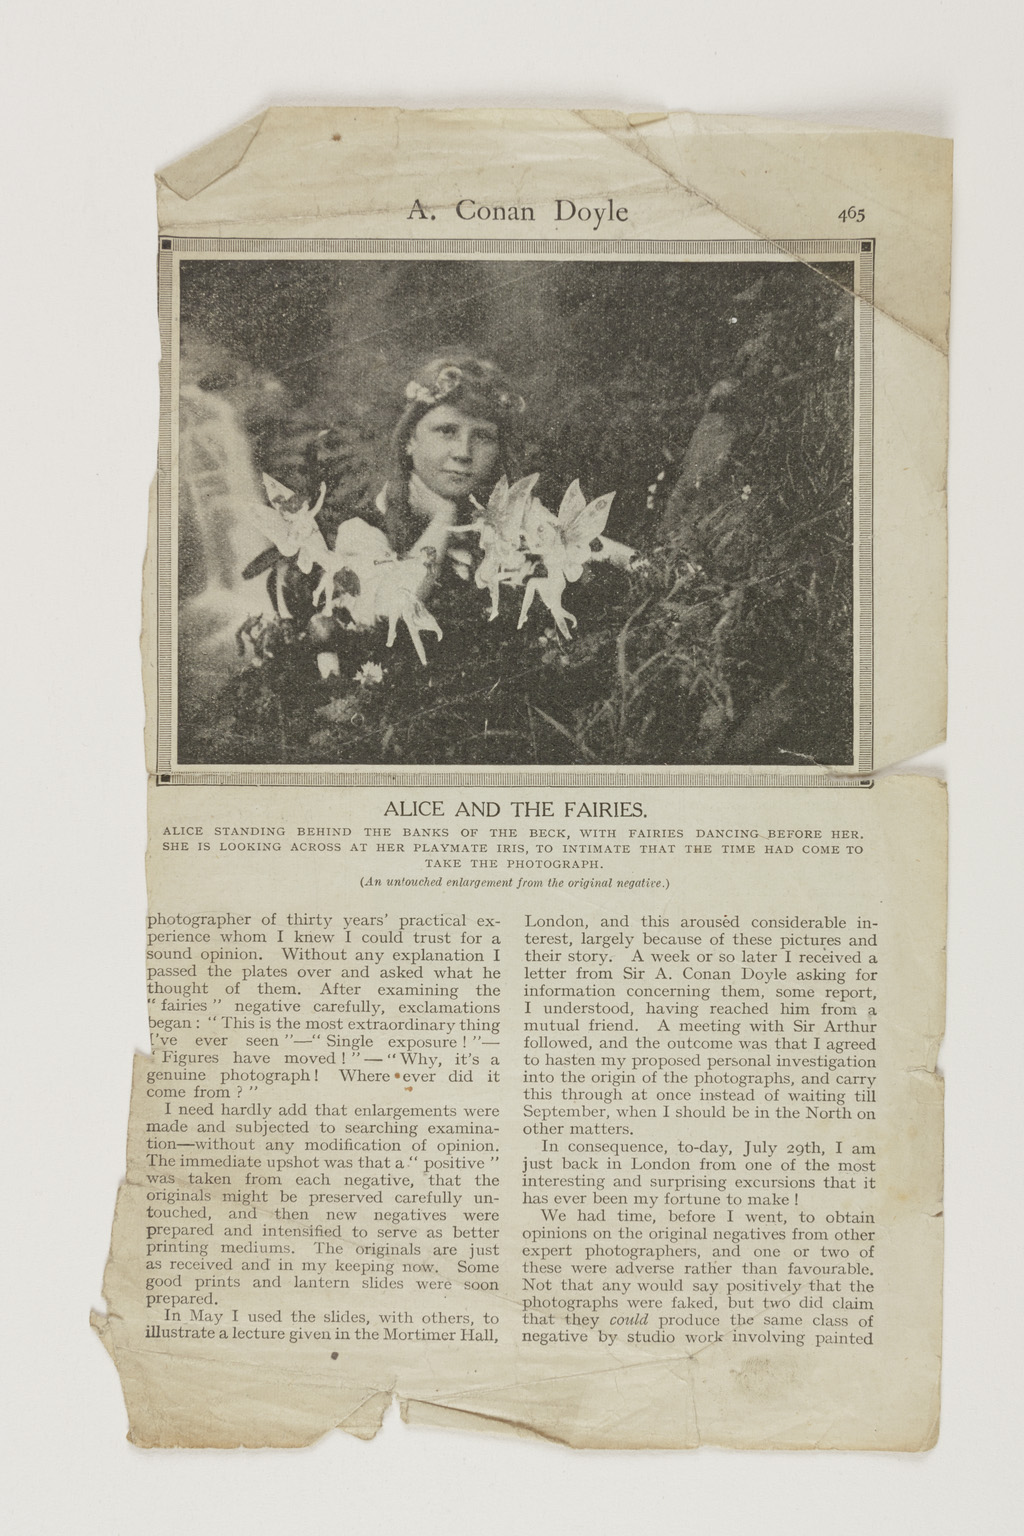 Cottingley Fairies photograph featured in The Strand magazine